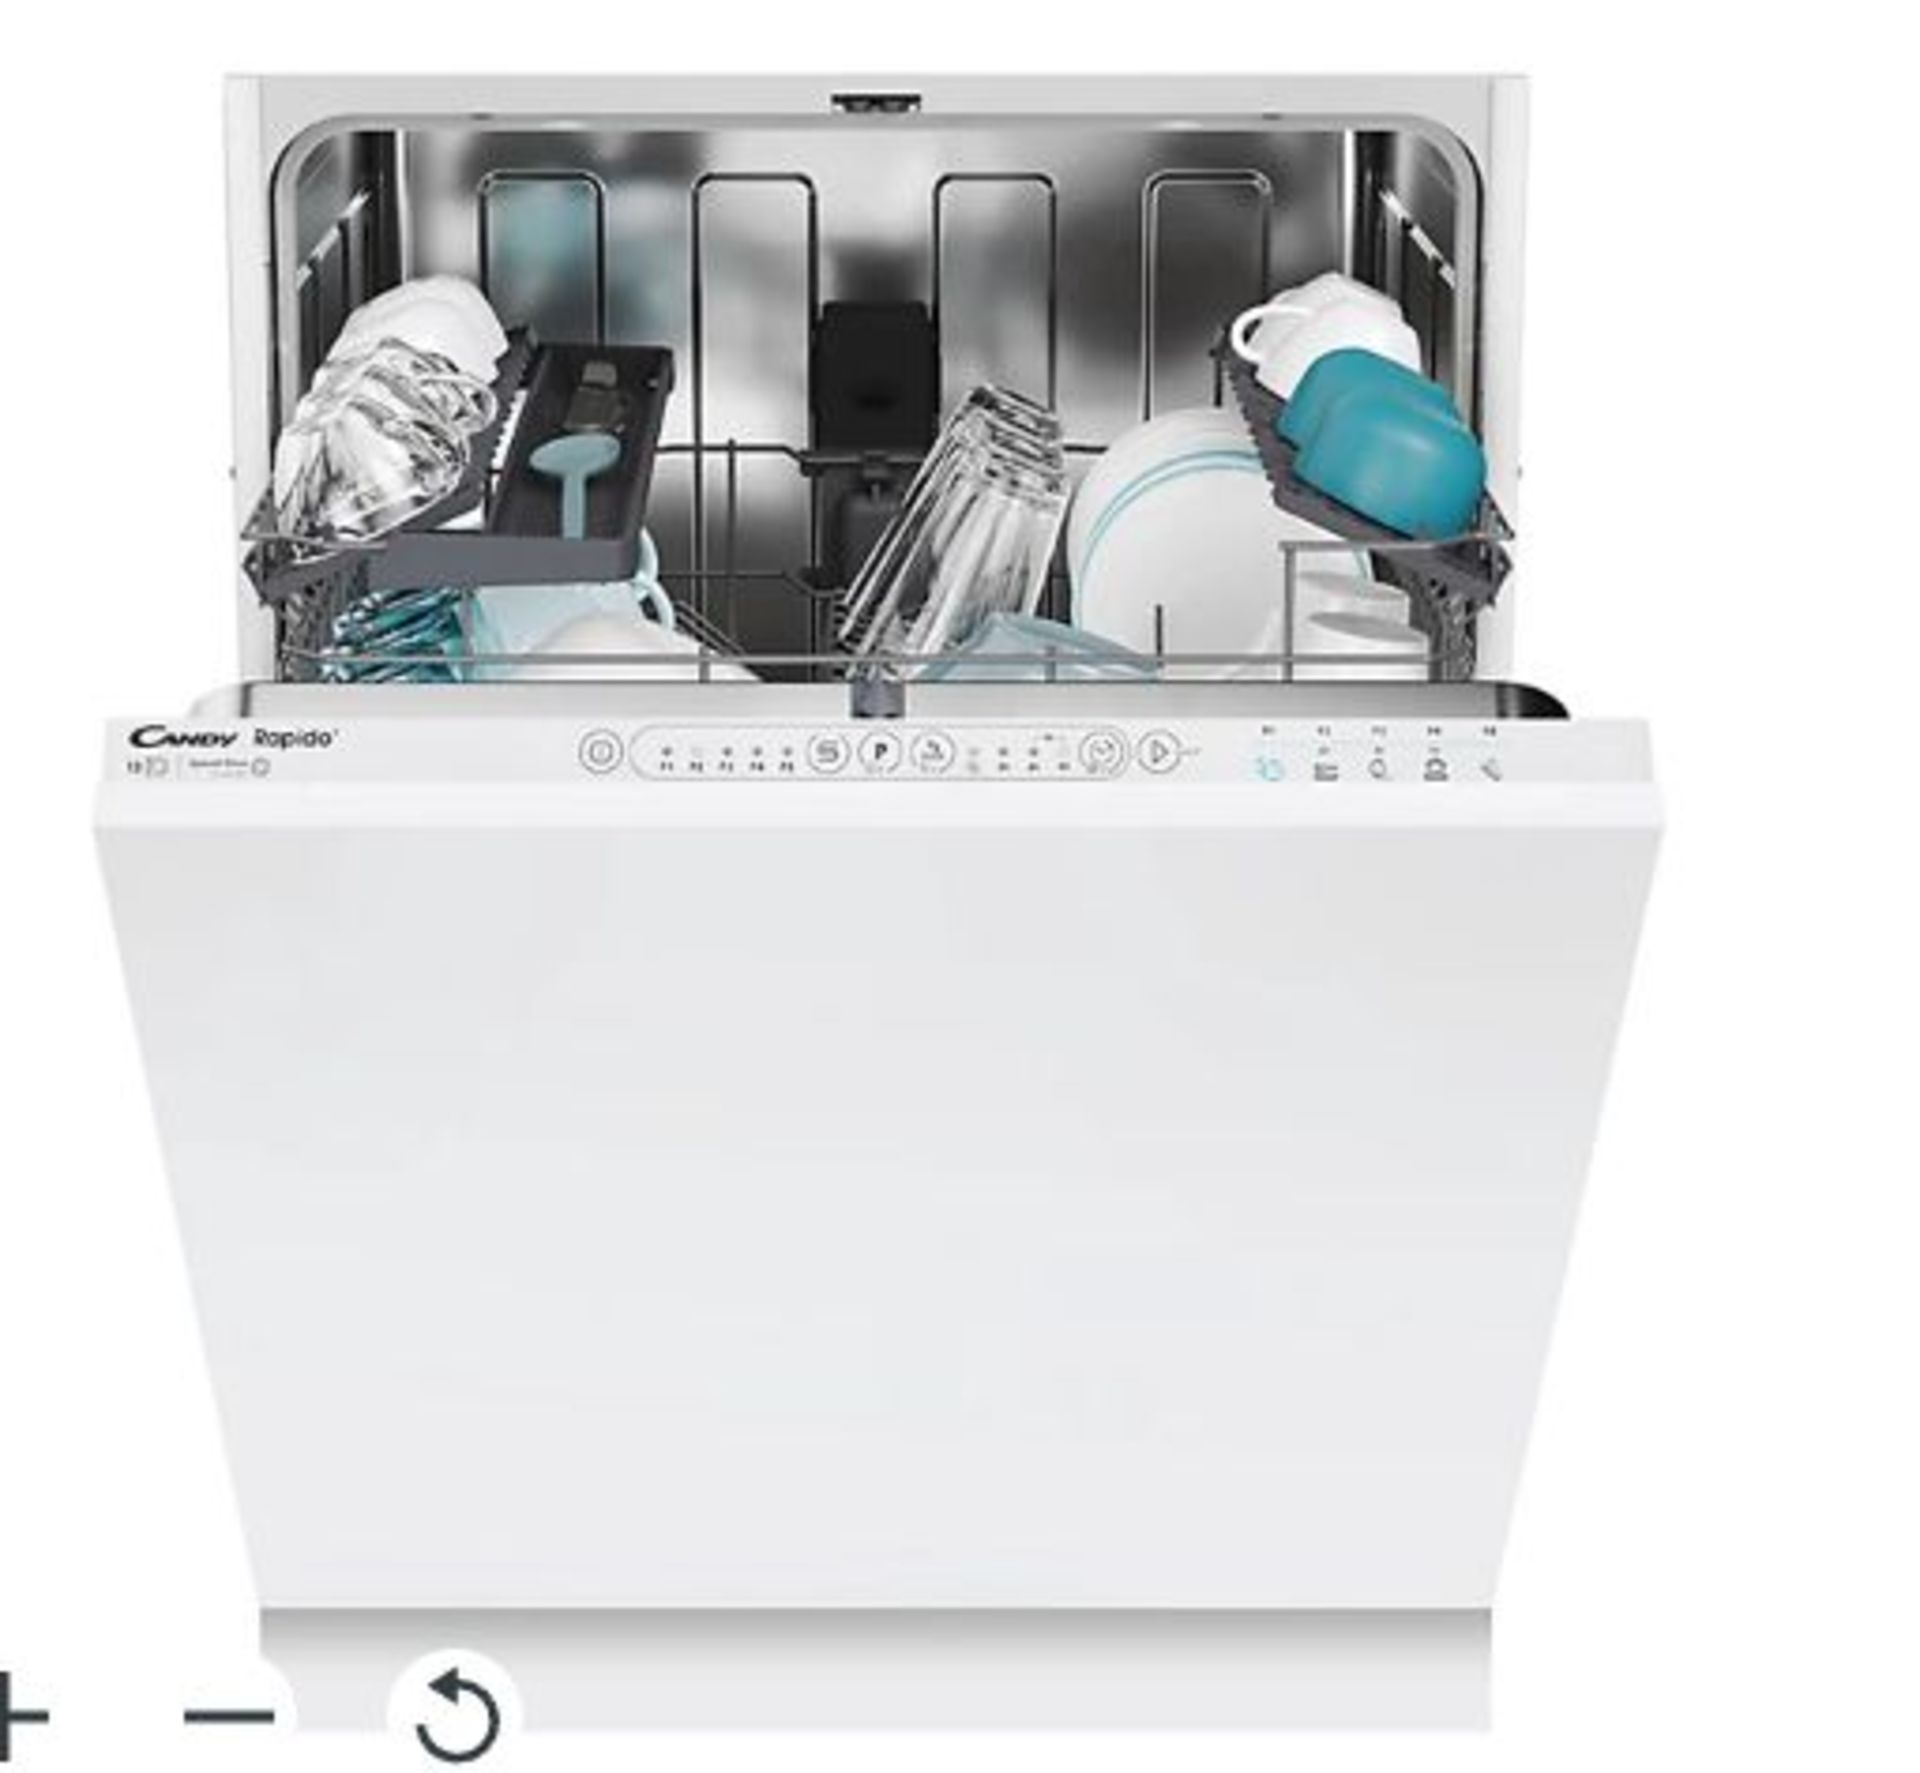 Candy CI 3E53E0W1-80 Integrated Full size Dishwasher - White. - S2. RRP £416.00. Candy Rapido' is